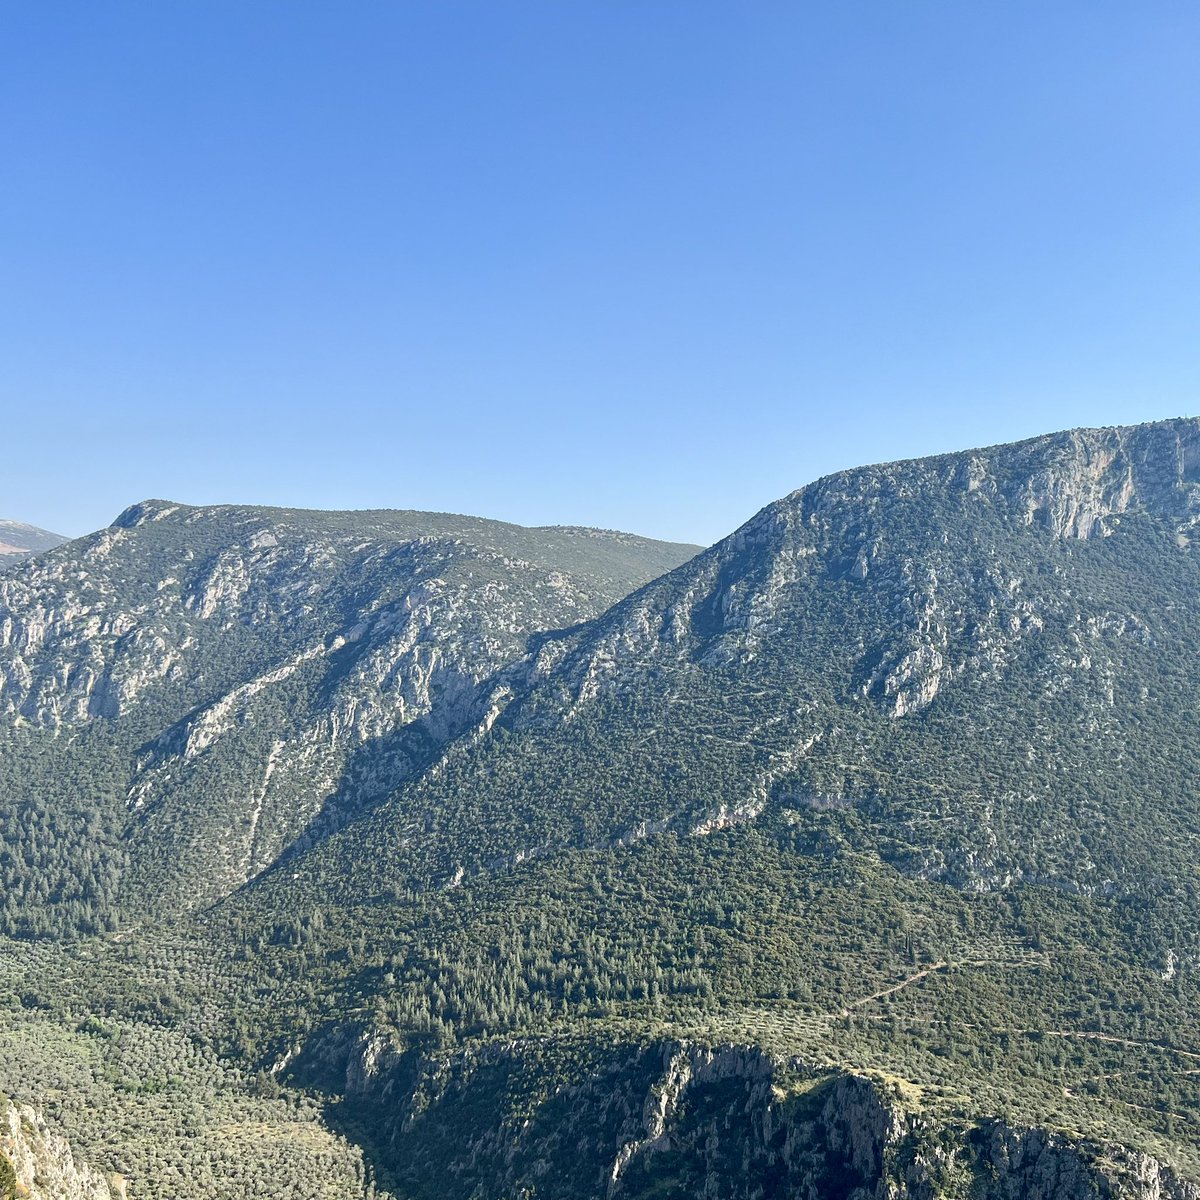 Tonight we’re in the Parnassus mountains—the spiritual heart of pre-Christian Greece. Greek mythology was rich and fascinating, but when the *true* myth of the gospel finally arrived, the old gods were out of business.